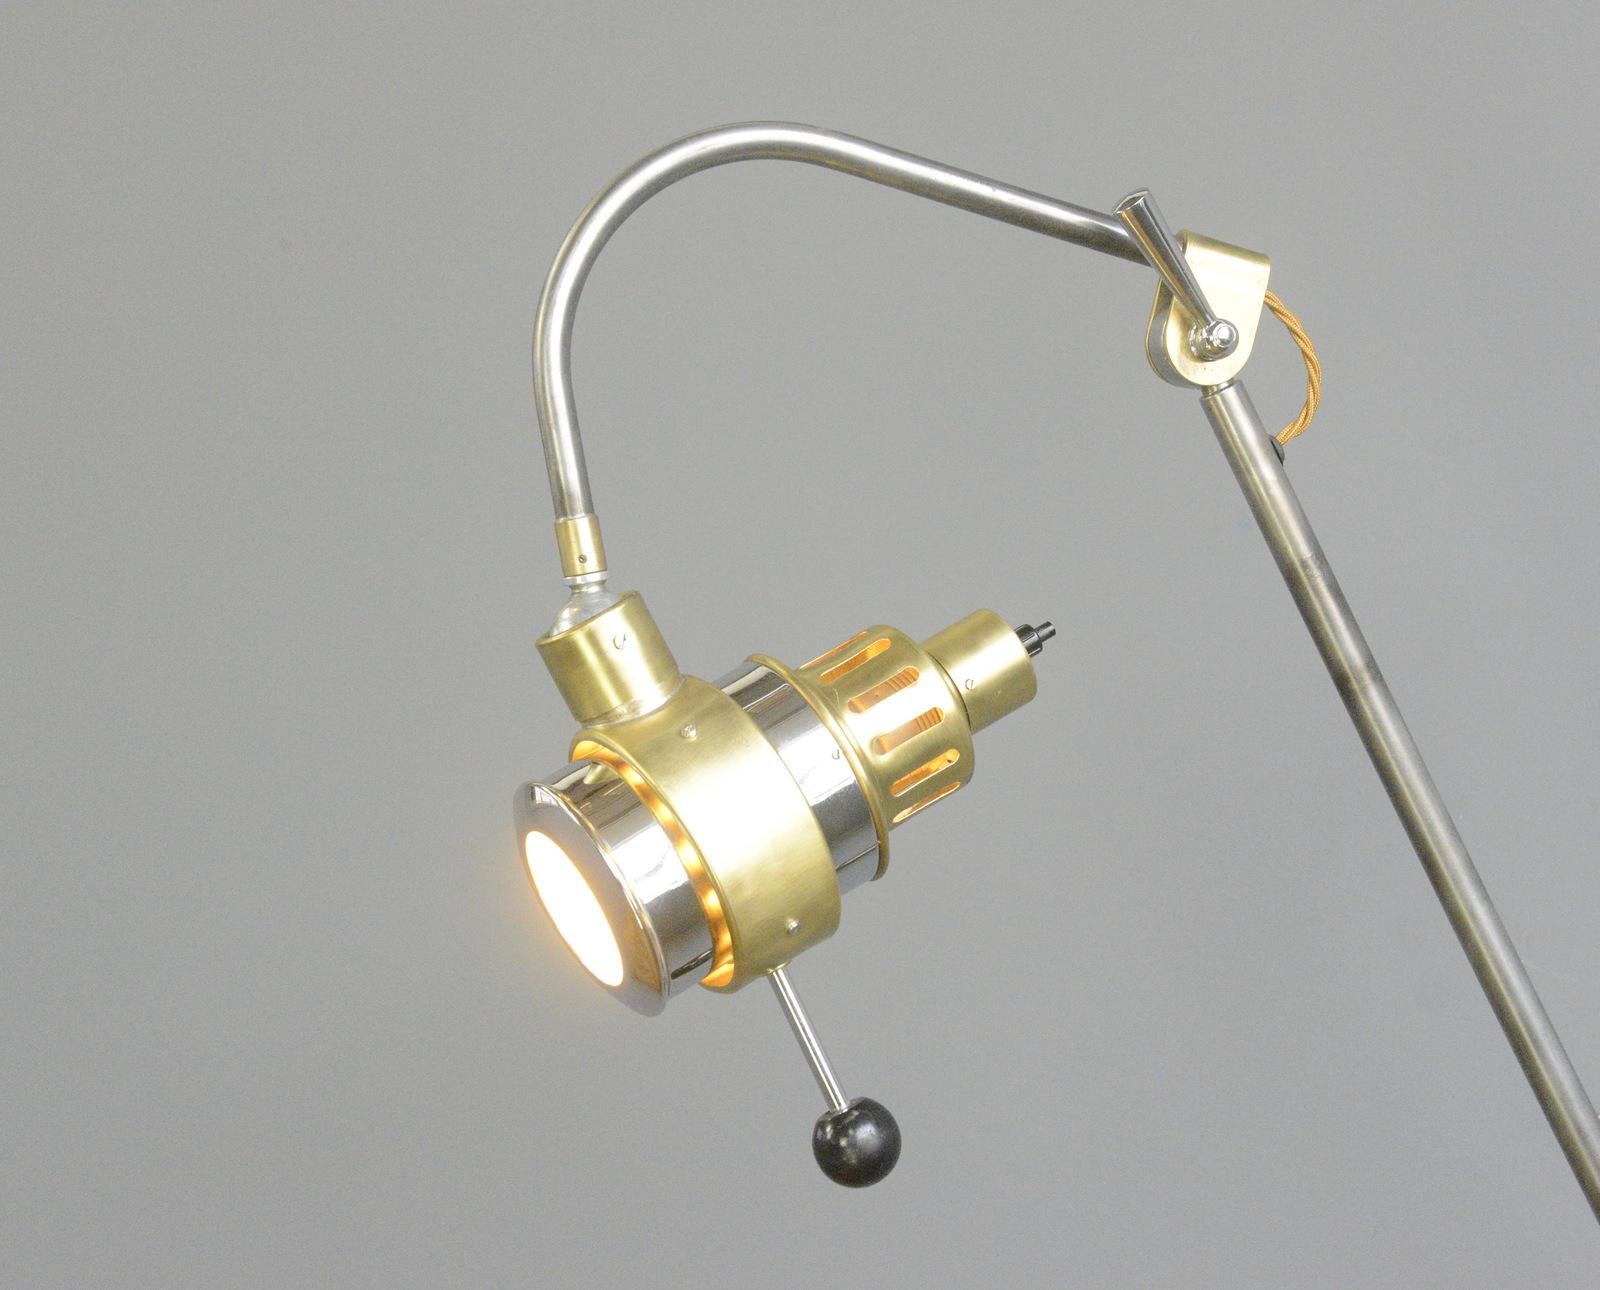 German Medical Wall Lamp Circa 1950s

- Chrome and brass
- On/Off switch on the shade
- Glass lens
- Takes E27 fitting bulbs
- Fully articulated
- German ~ 1950s
- 12cm wide
- Extends up to 100cm from the wall

Condition Report

Fully re wired with